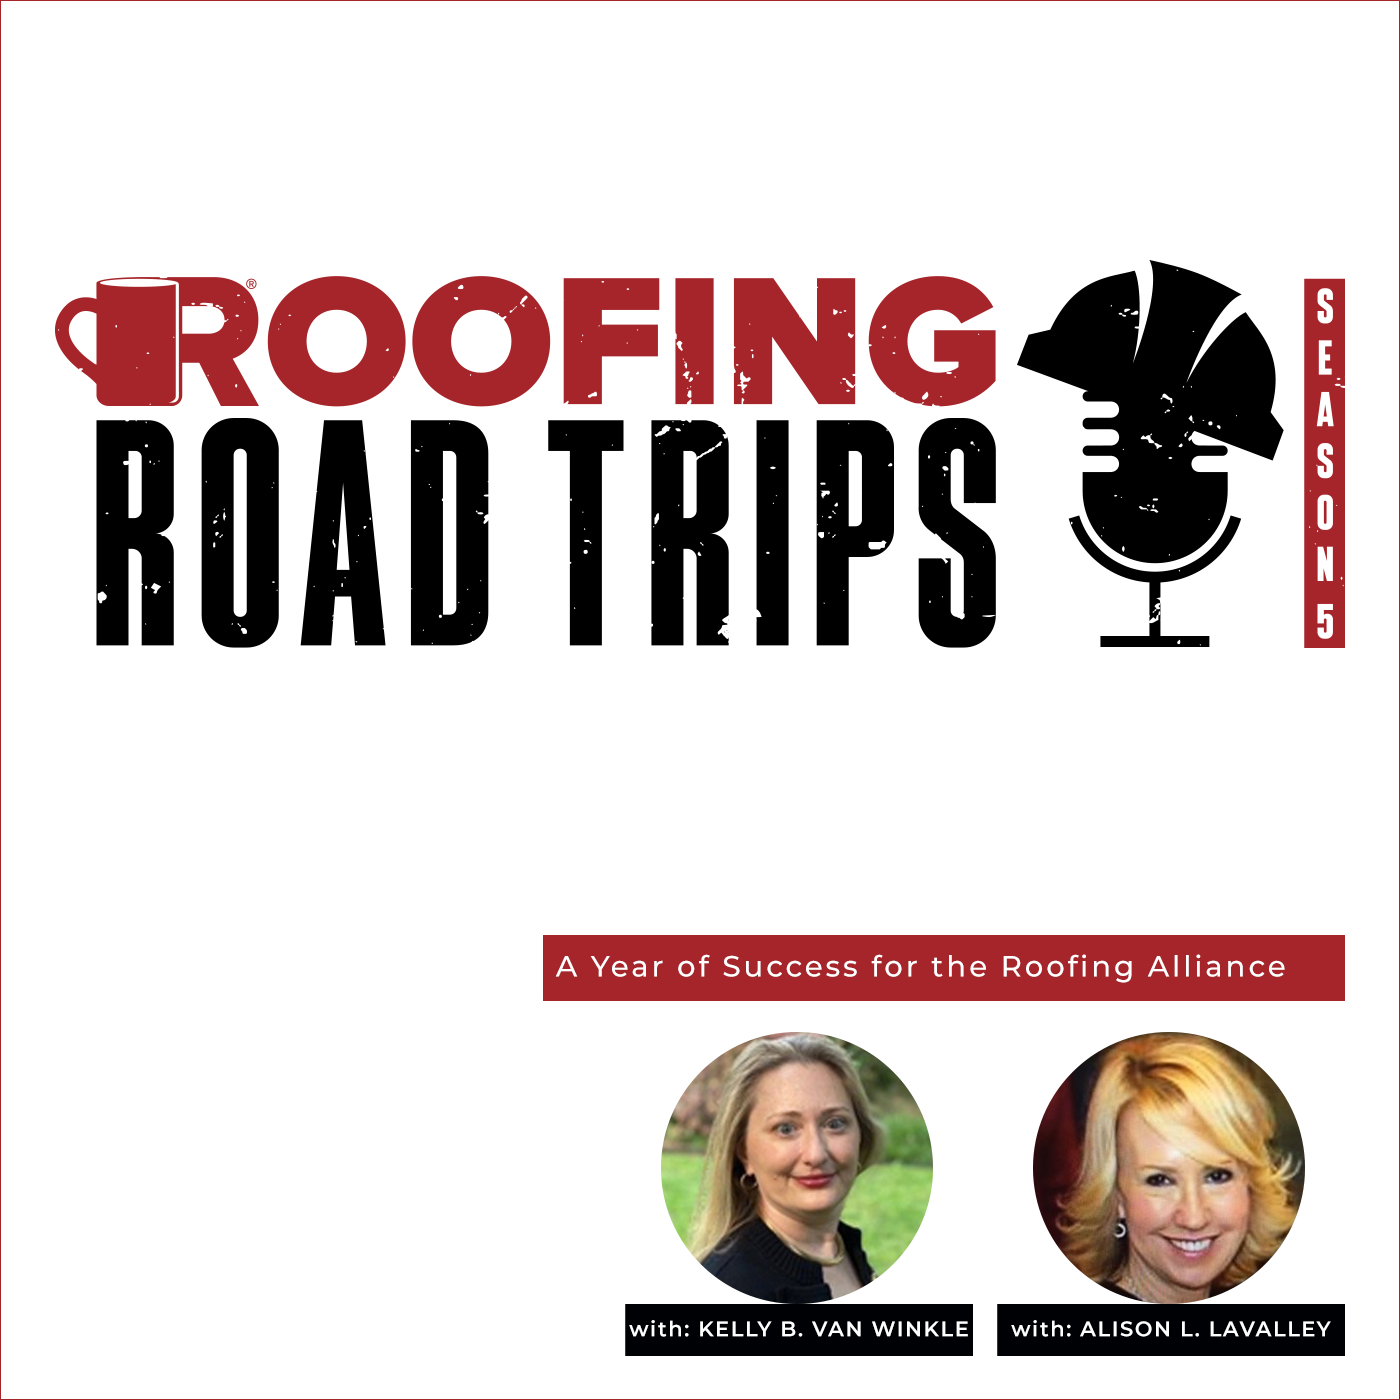 Roofing Alliance - Kelly B. Van Winkle & Alison L. LaValley - A Year of Success for the Roofing Alliance - POD